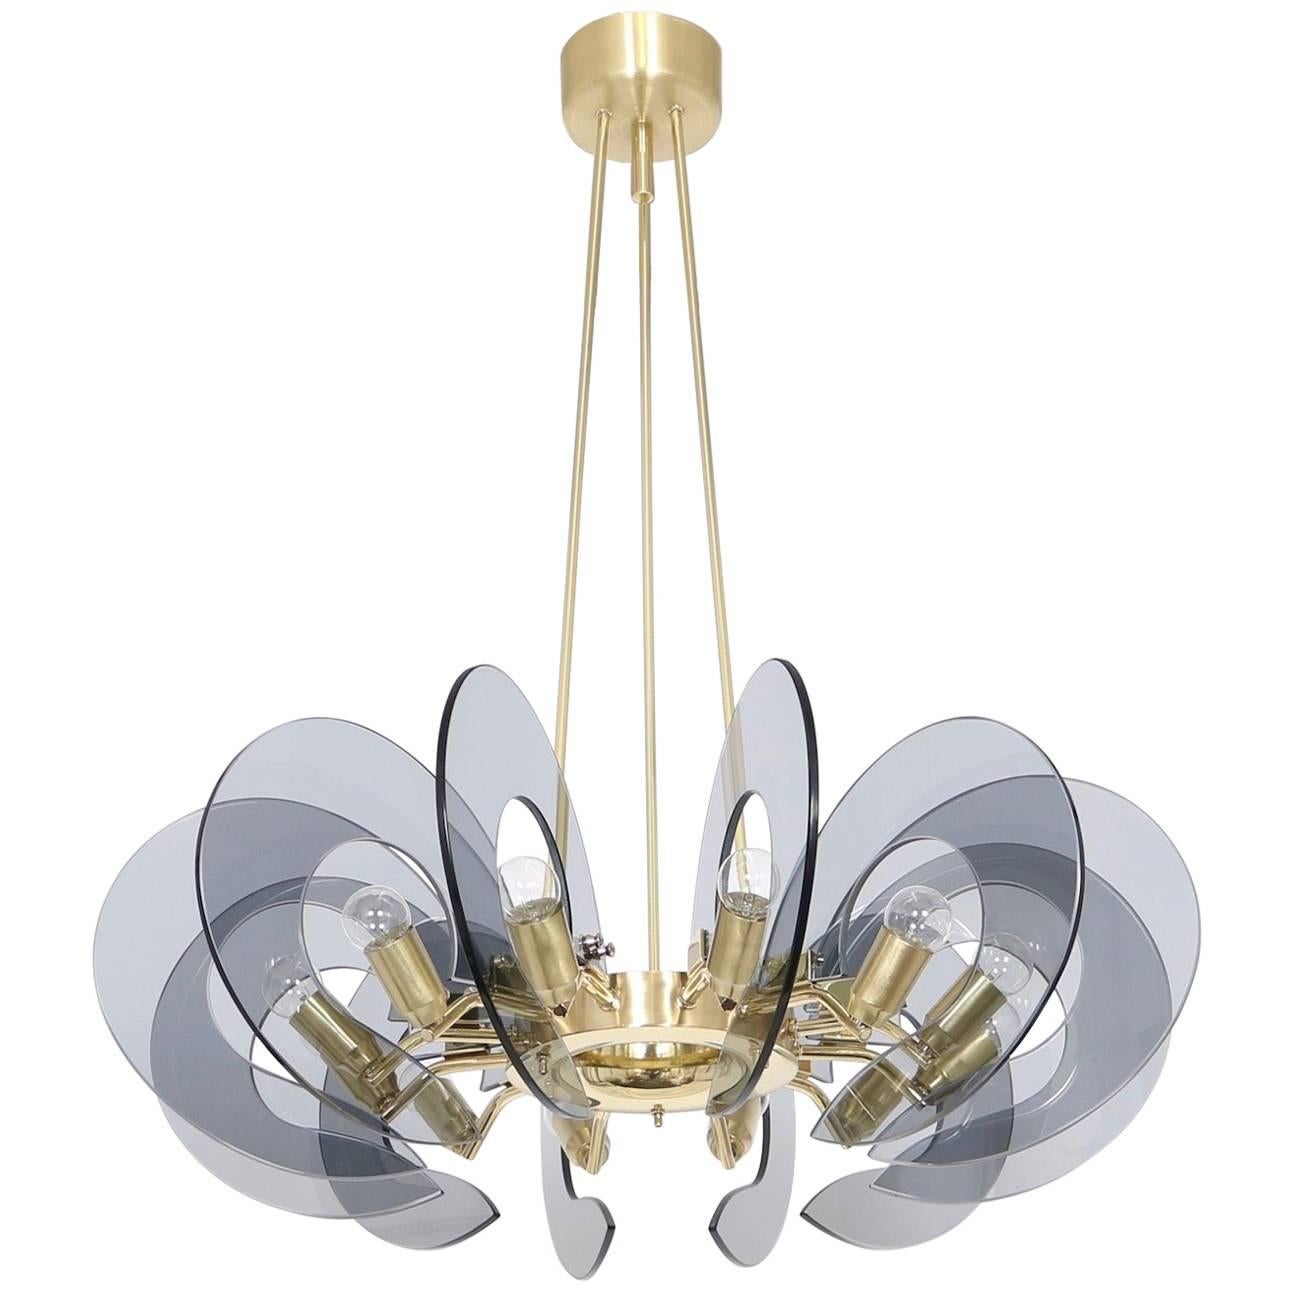 Restored Italian Chandelier in Brass and Blue Glass, Attributed to Fontana Arte